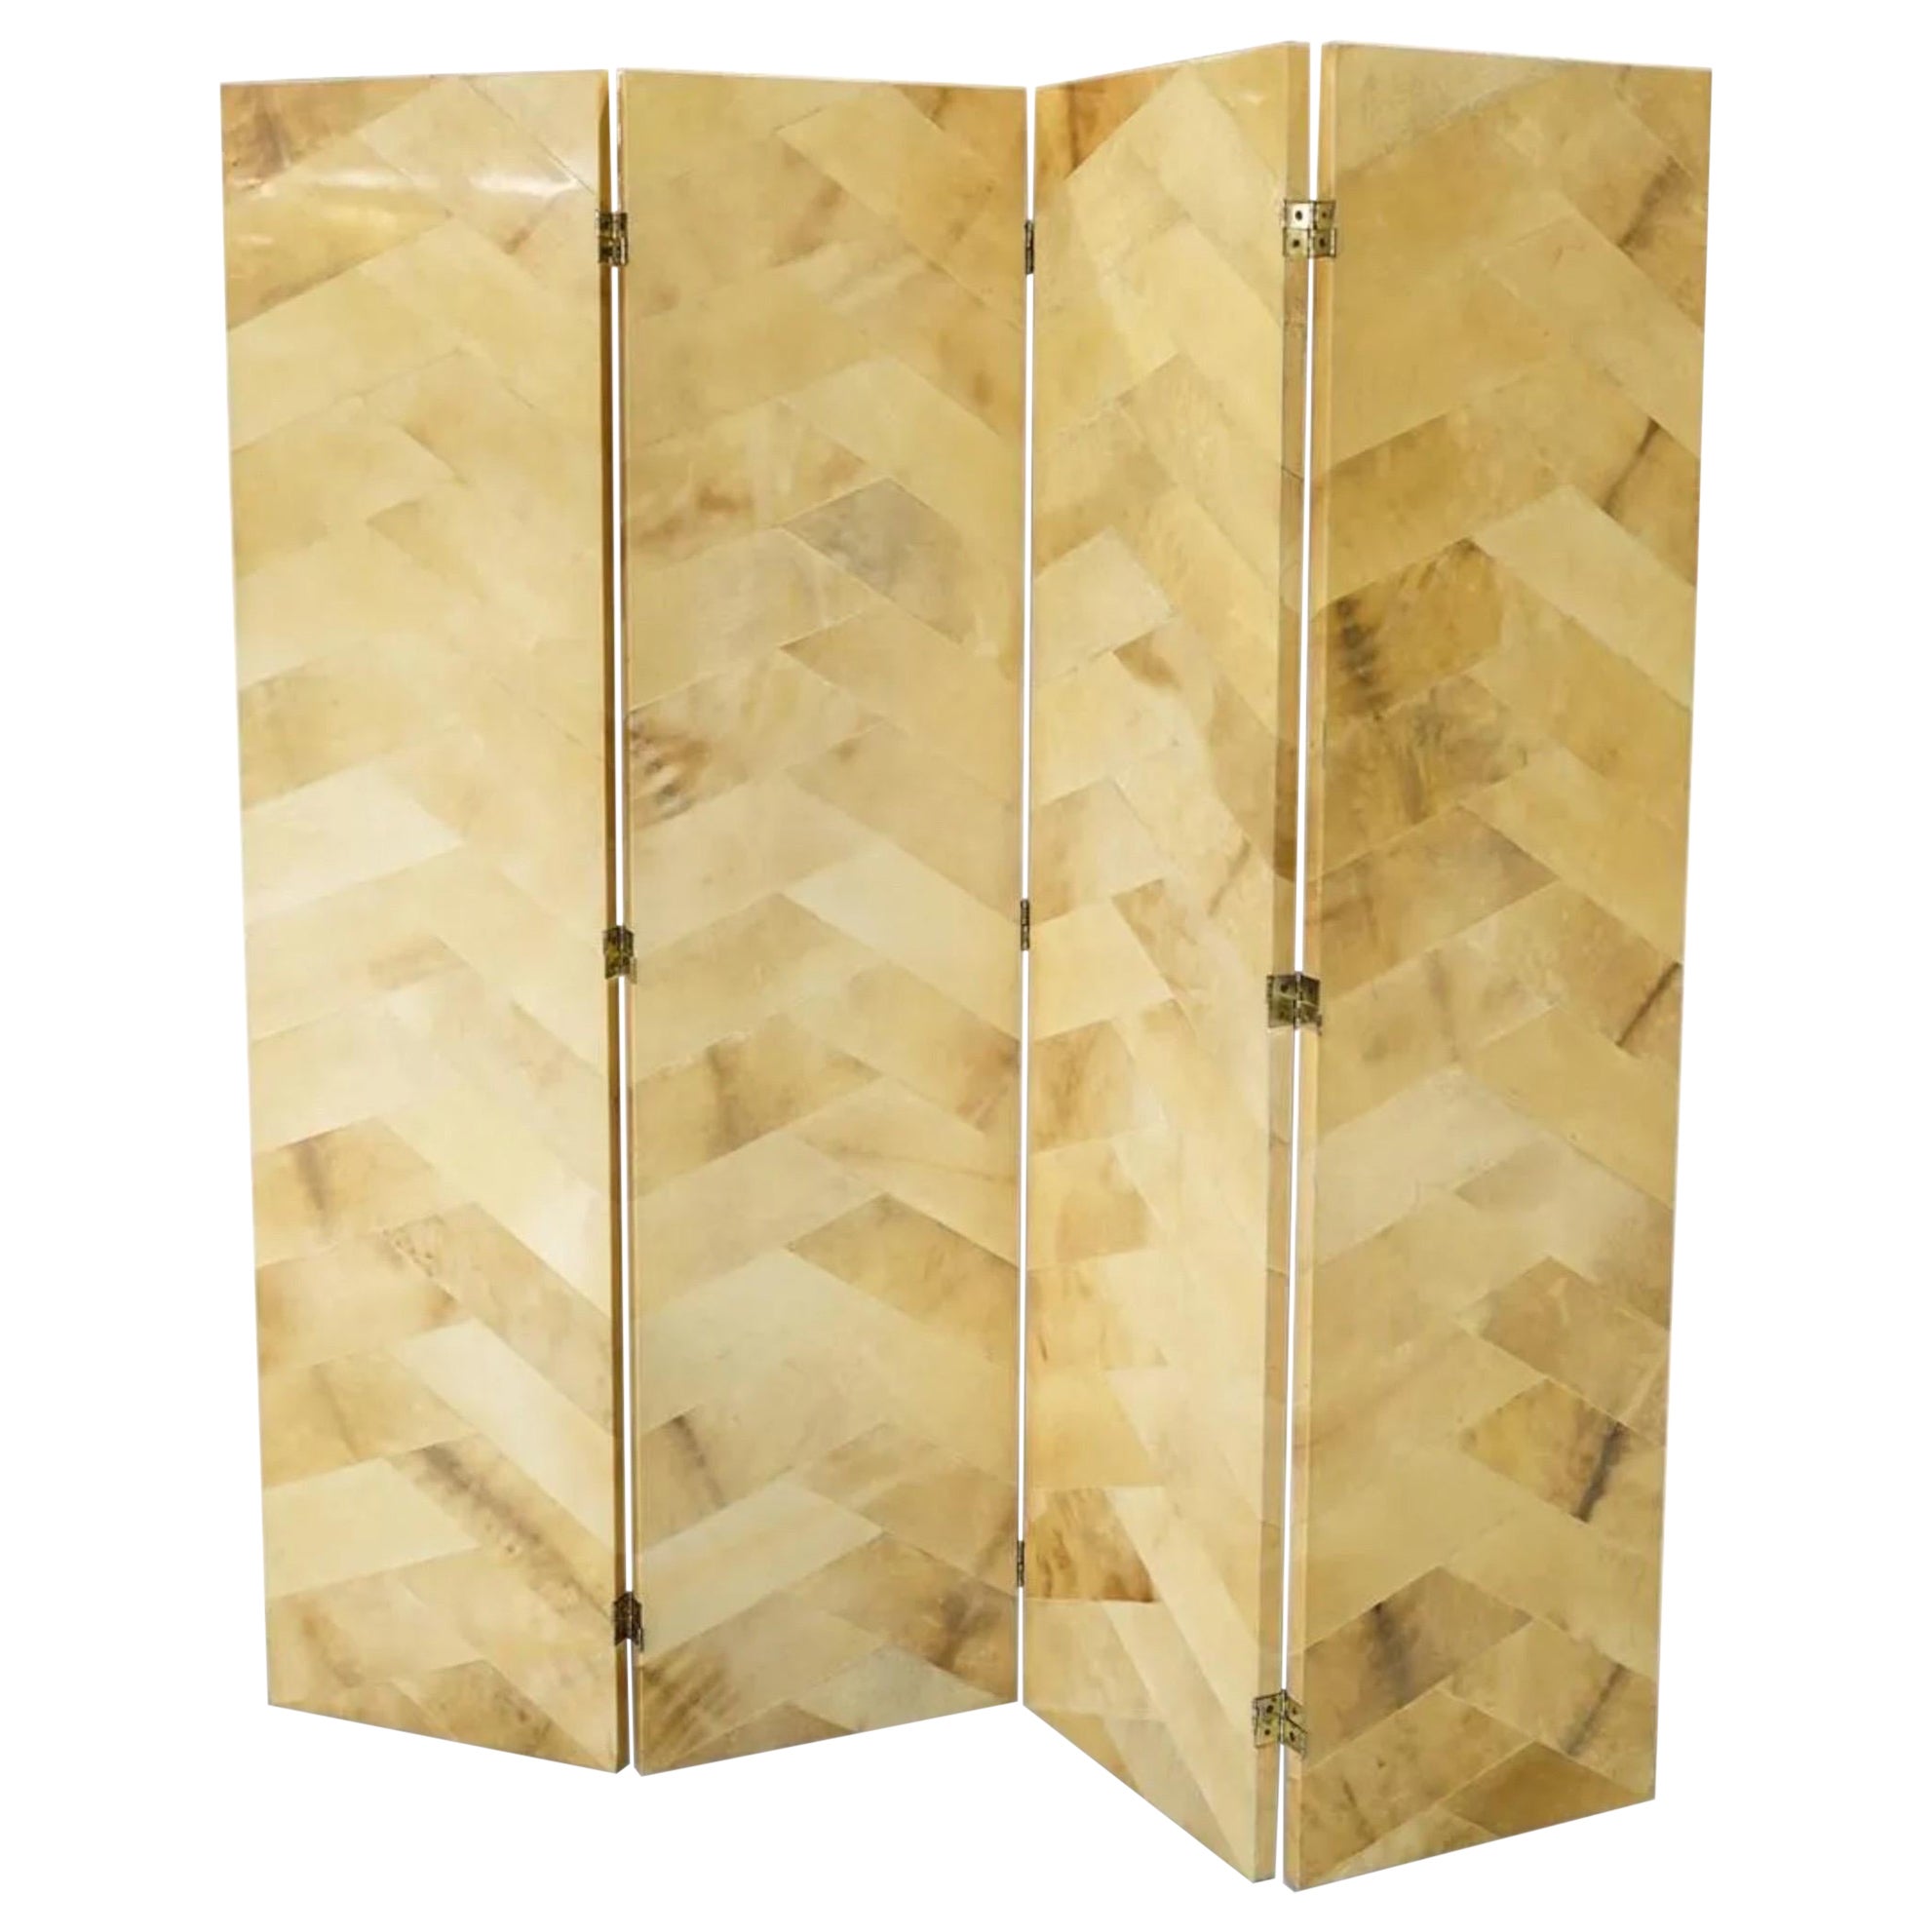 Ron Seff Goatskin Lacquered Screen or Room Divider For Sale